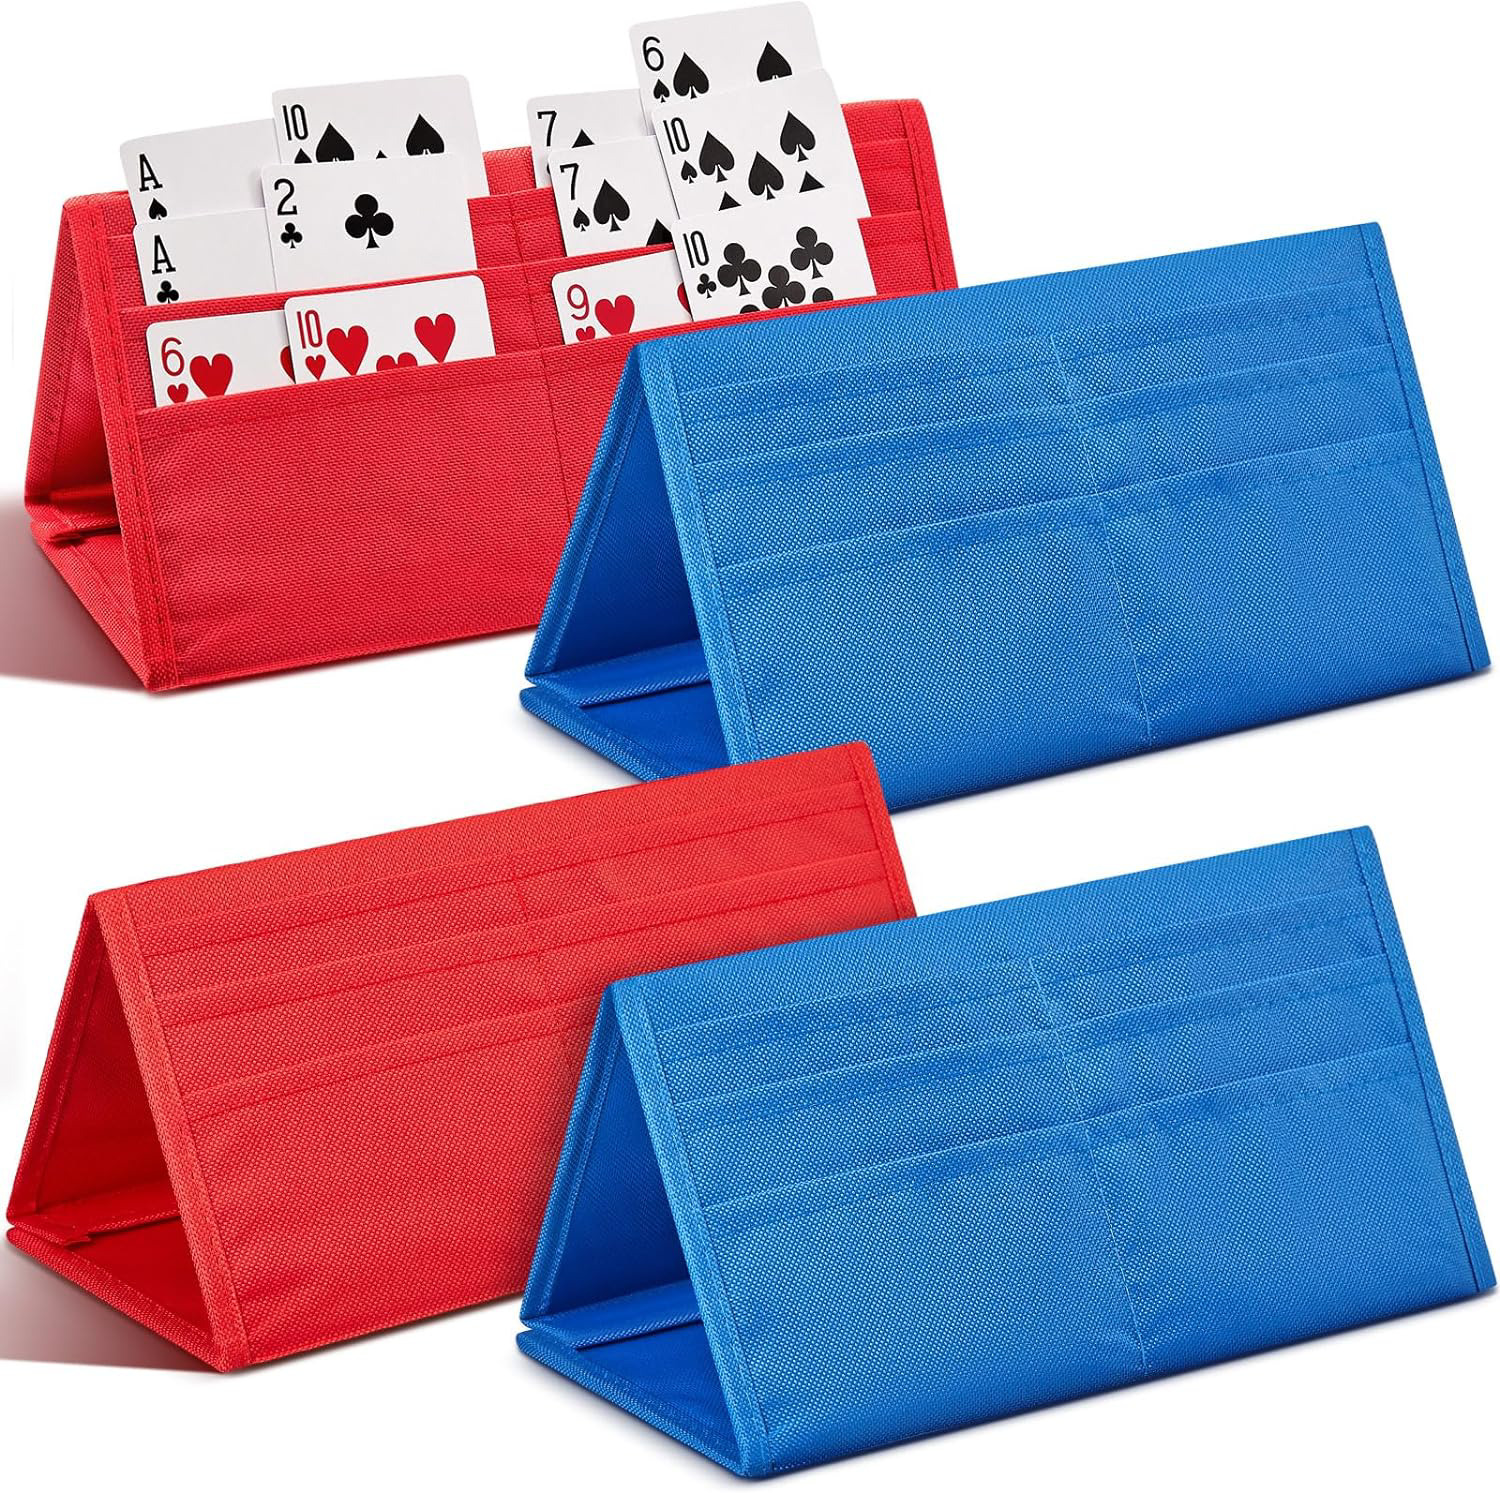 4 Pcs Foldable Card Holders for Playing Cards Hands Free Playing Card Holder for